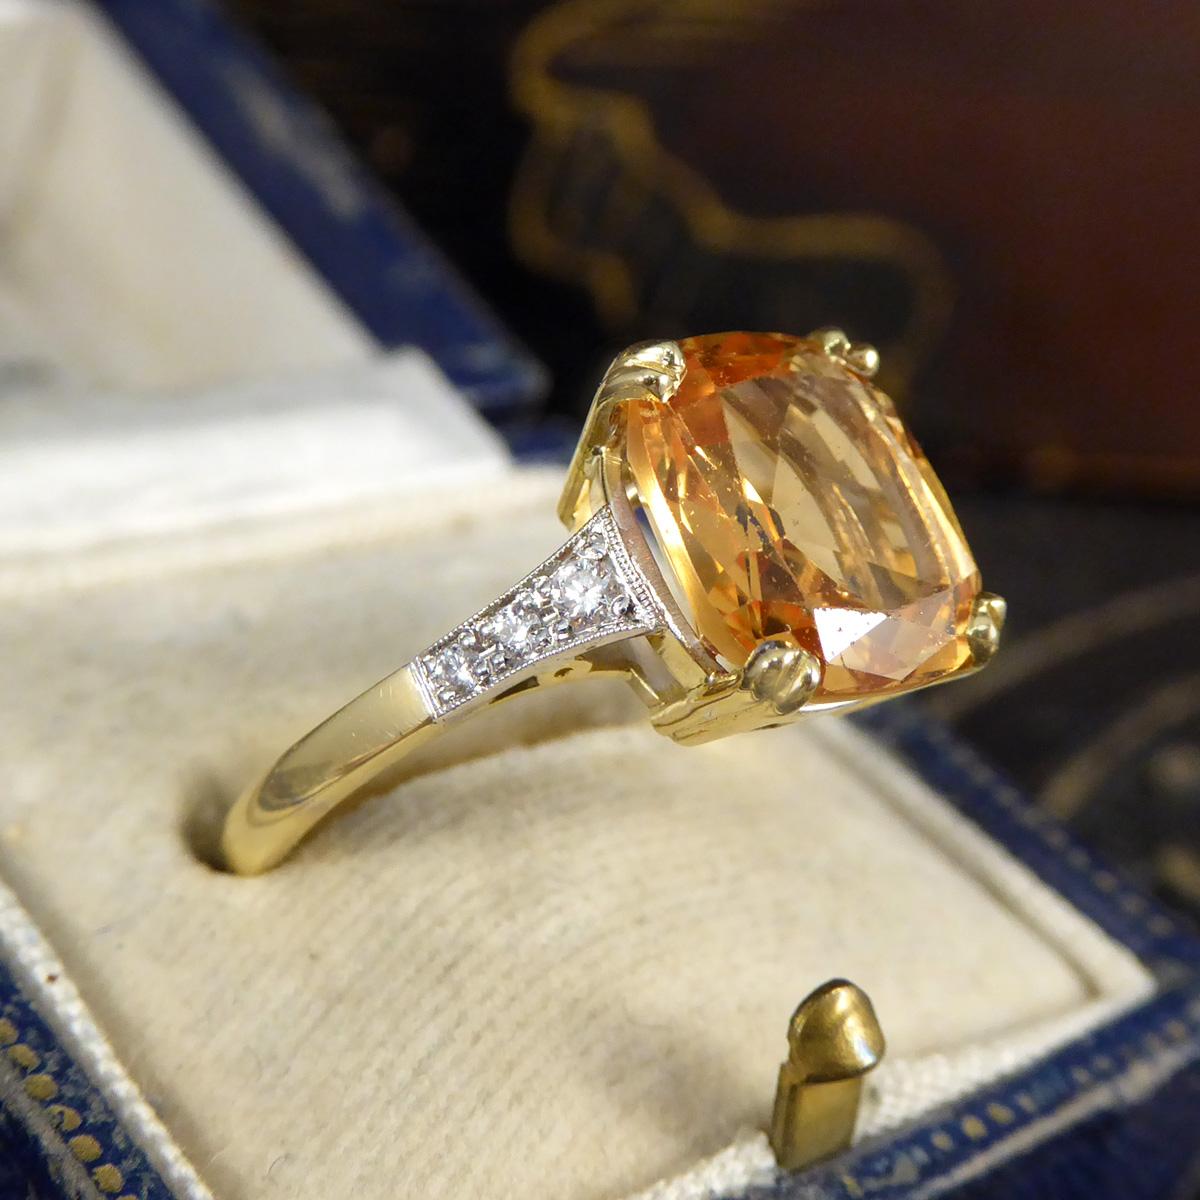 5.12ct Imperial Topaz Ring with Diamond Set Tapered Shoulders in 18ct Gold 3